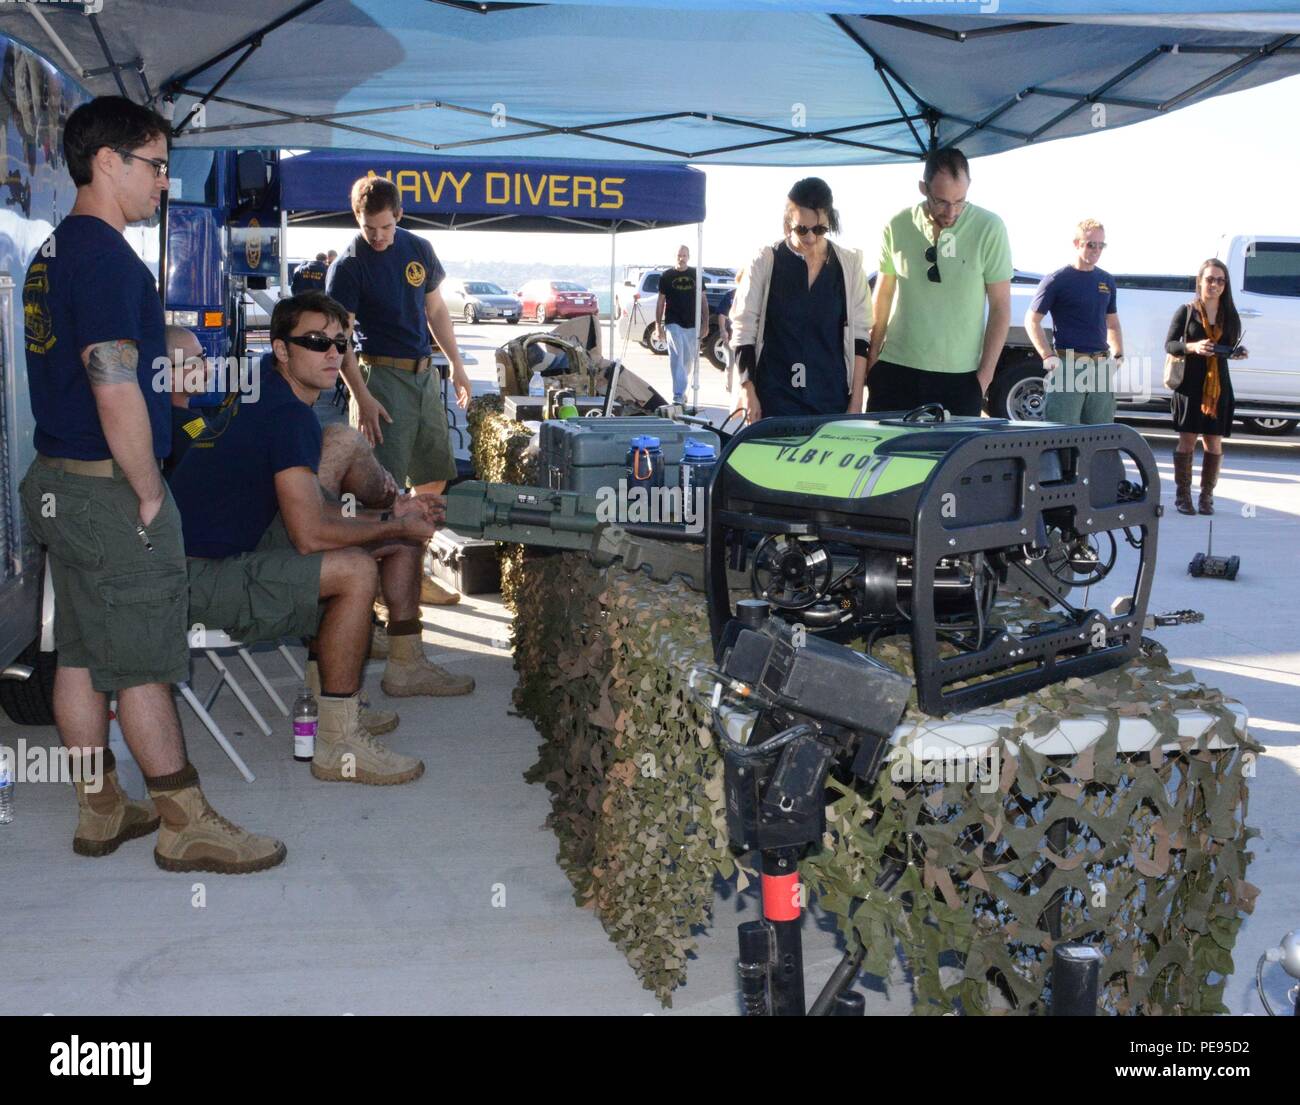 151111-N-NH654-007 SAN DIEGO  (Nov. 11, 2015) Sailors from Explosive Ordnance Disposal (EOD) Mobile Unit 11 display and discuss the tools of EOD with the public during the Salute to Service Festival.  The Salute to Service Festival is held annual on the USS Midway on Veterans Day. (U.S. Navy photo by Lieutenant Patricia Kreuzberger/Released) Stock Photo